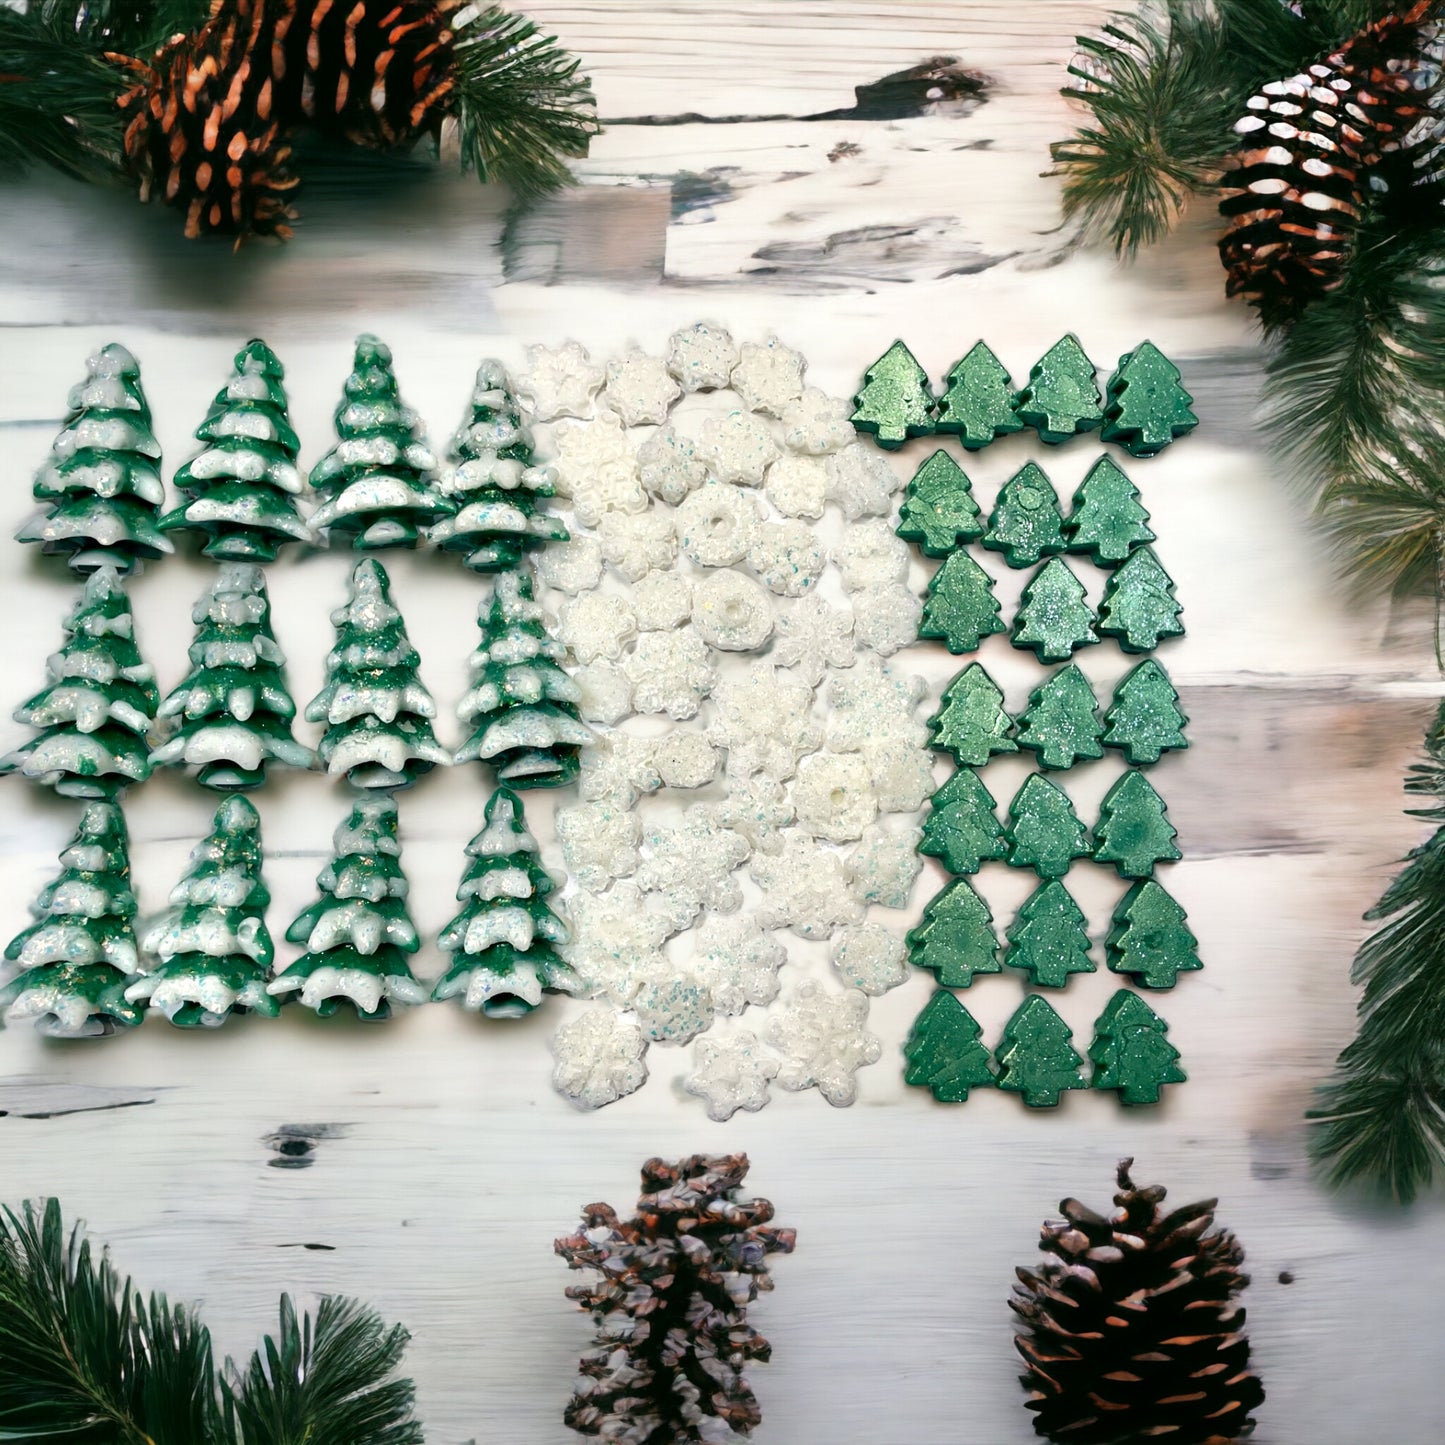 Christmas Tree Wax Melts. 6 Ounces/Soy Wax Melts/Snowflakes/Trees/Strongly Scented Wax Melts/ Wax Tarts for Wax Warmers/Holiday Wax Meltslts. Strongly Scented Tree & Snowflake Shaped Wax Melts & Wax Tarts For Wax Warmers. 6 Ounces